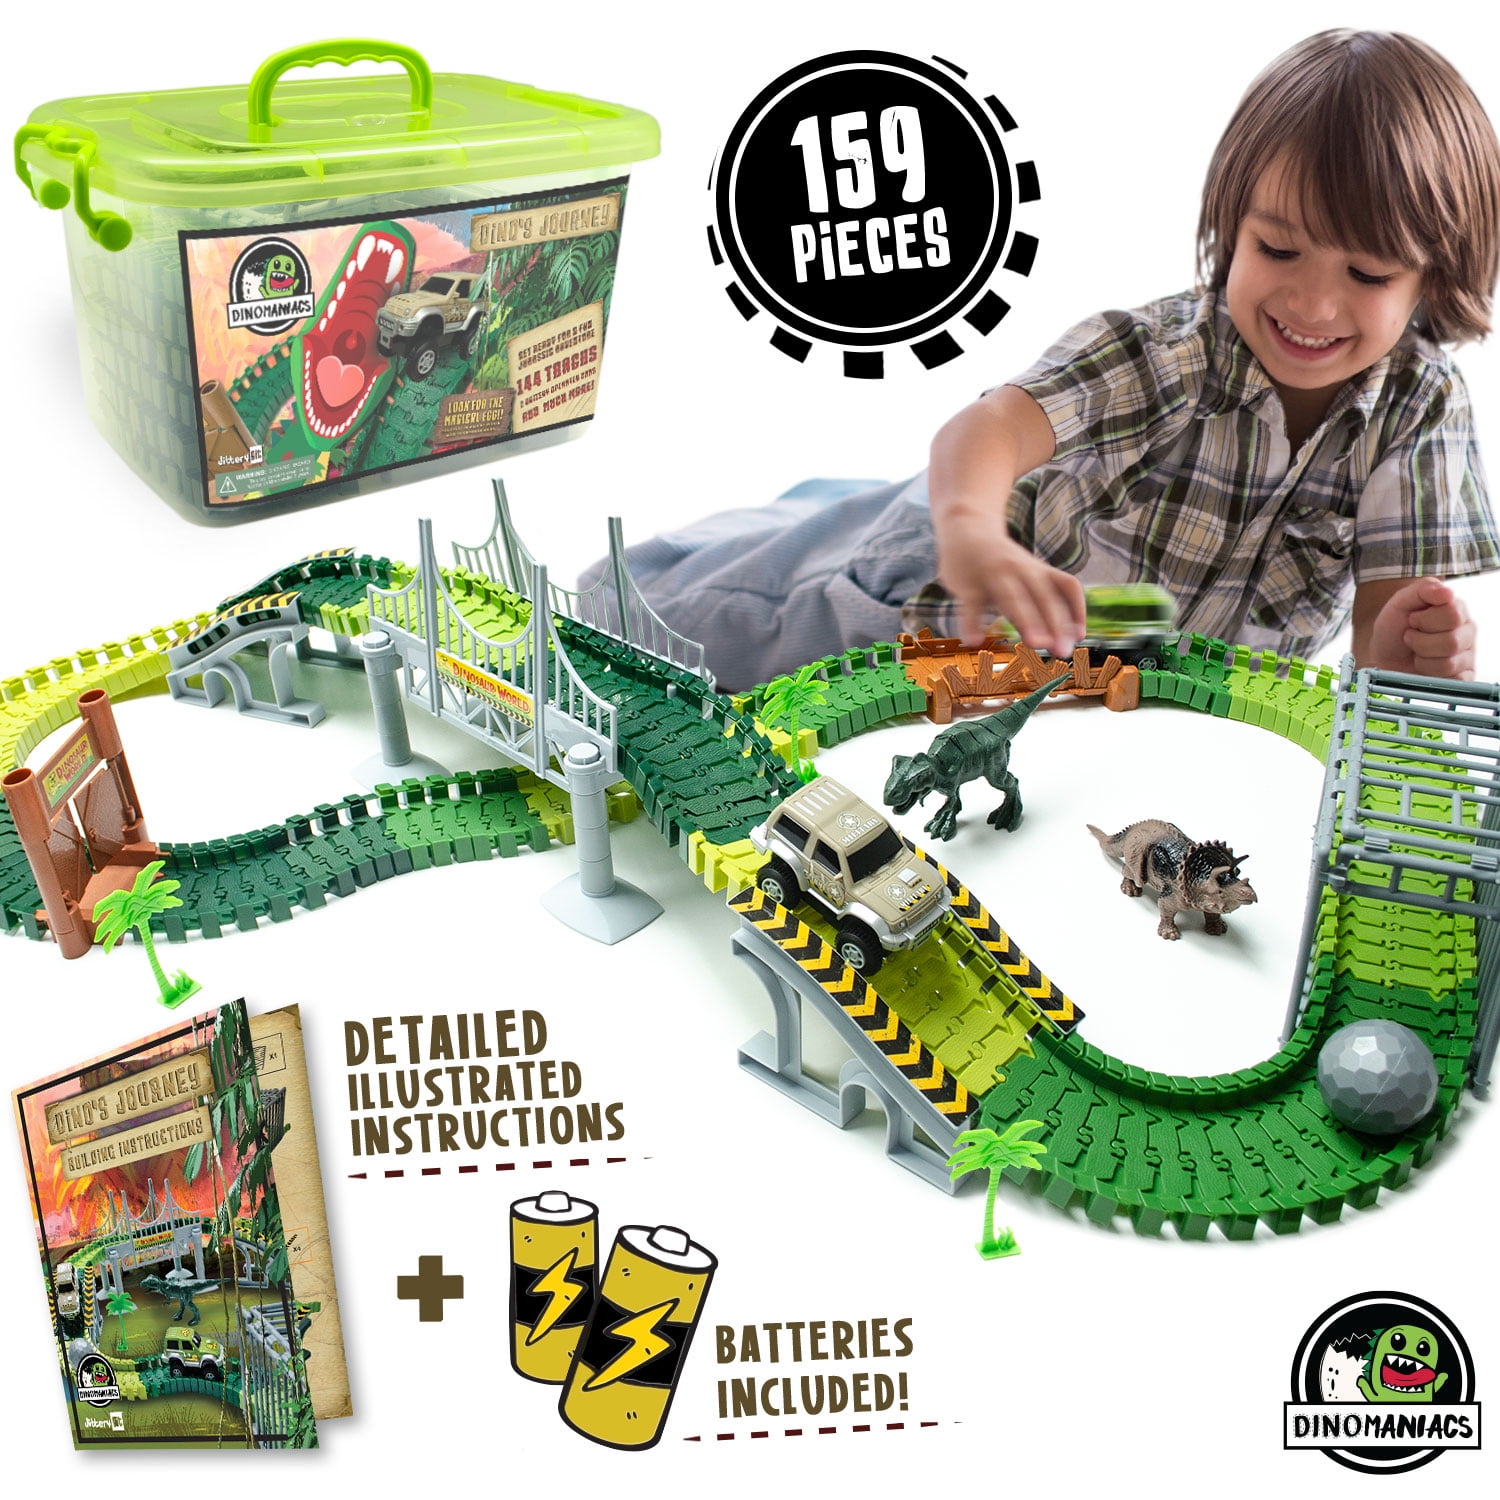 52 PCS Variety Assembly Flexible Train Track with Electric Vehicle Playset for 3 4 5 6 Year Old Boys Girls Toddlers Birthday Gifts COGO MAN Dinosaur Toys Race Car Track Set